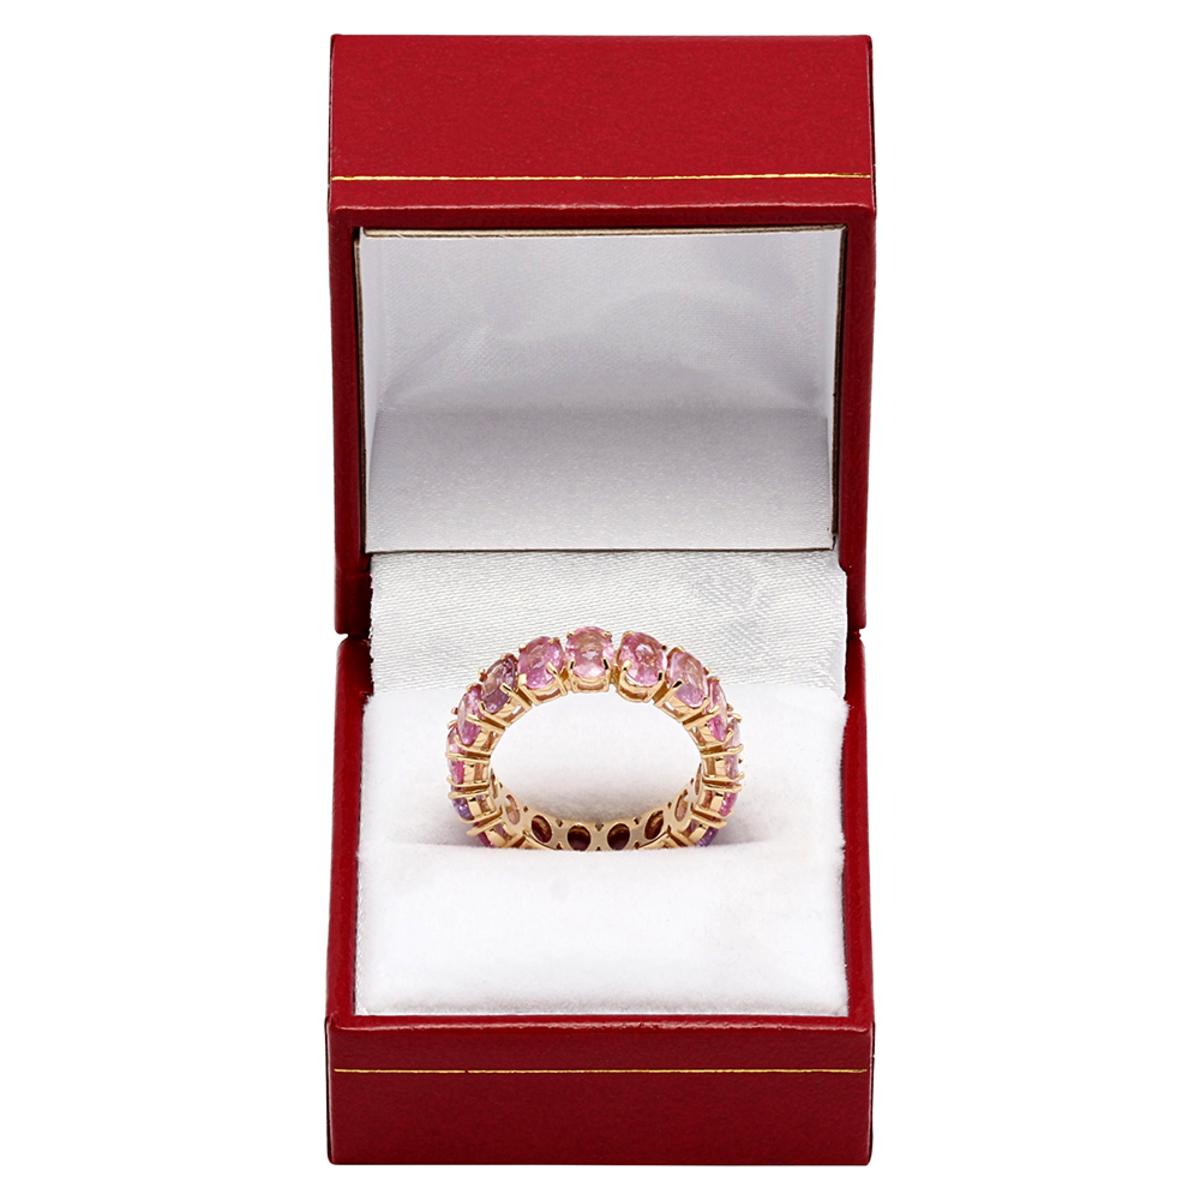 14k Yellow Gold 8.99ct Pink Sapphire Eternity Band Ring